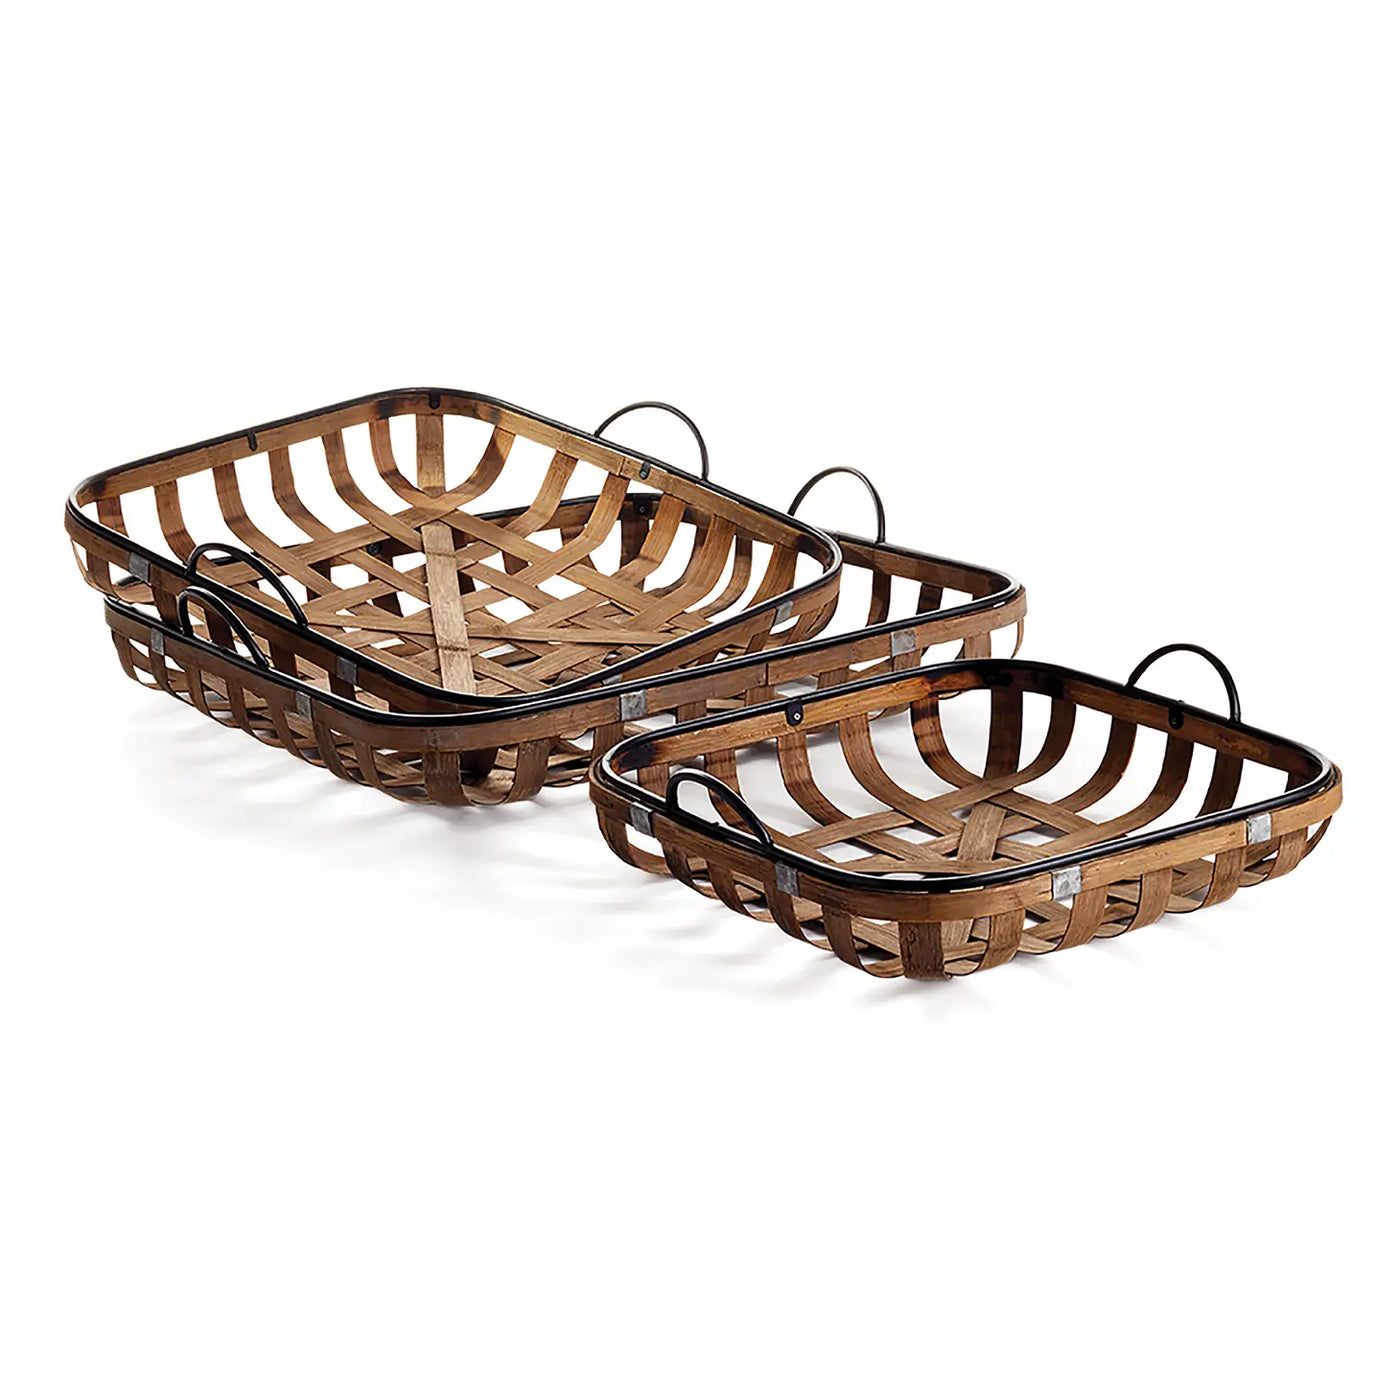 Riverbend Square Tobacco Baskets with Handles